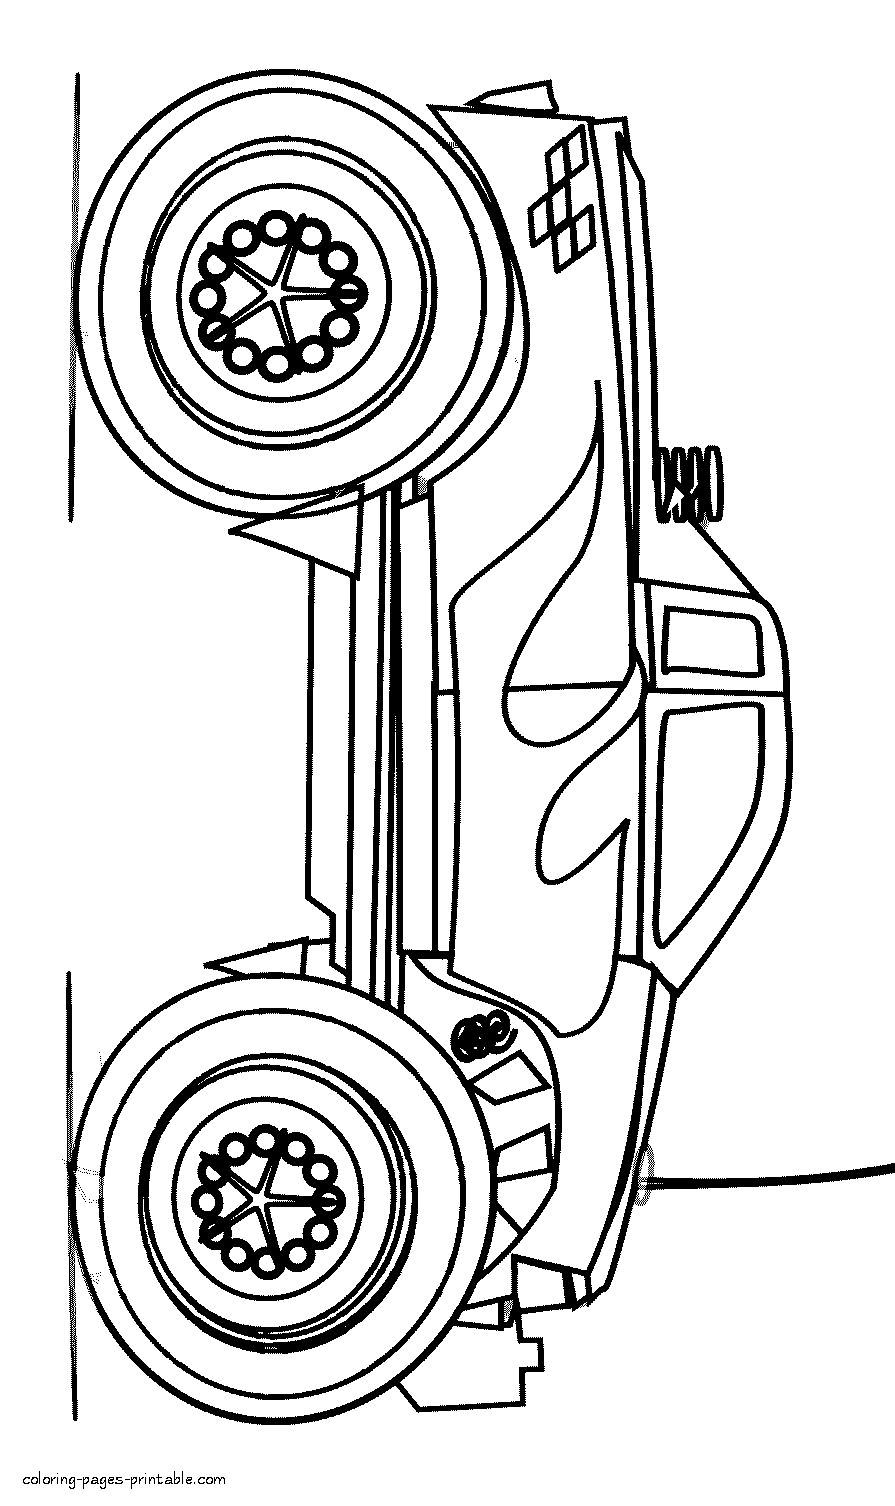 Simple monster truck coloring page || COLORING-PAGES-PRINTABLE.COM